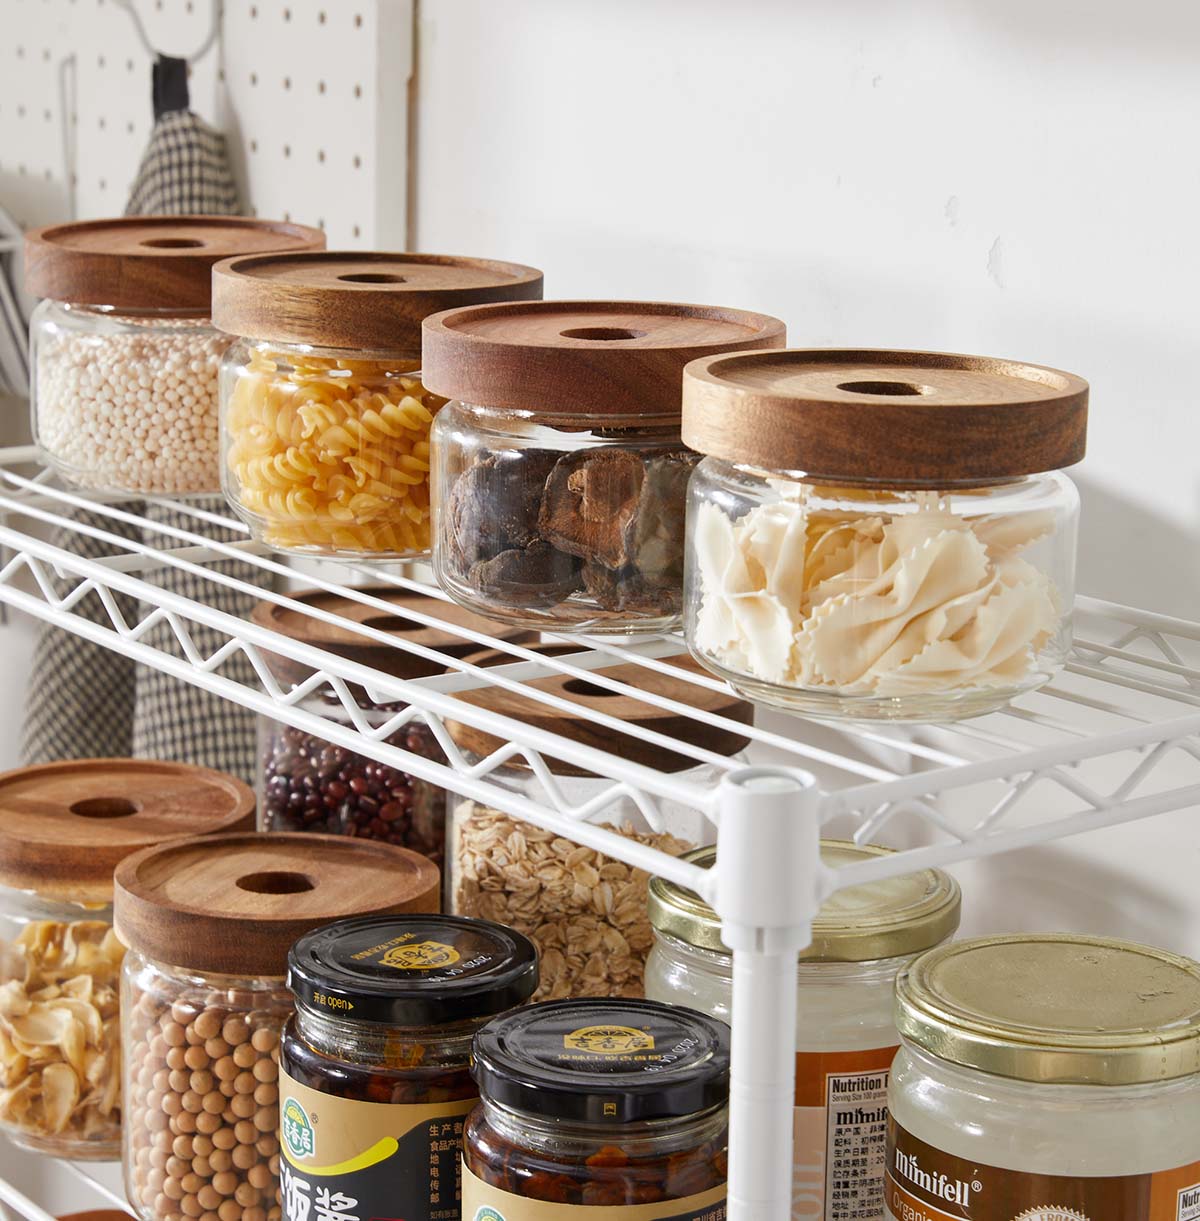 wire kitchen/pantry shelving wholesale